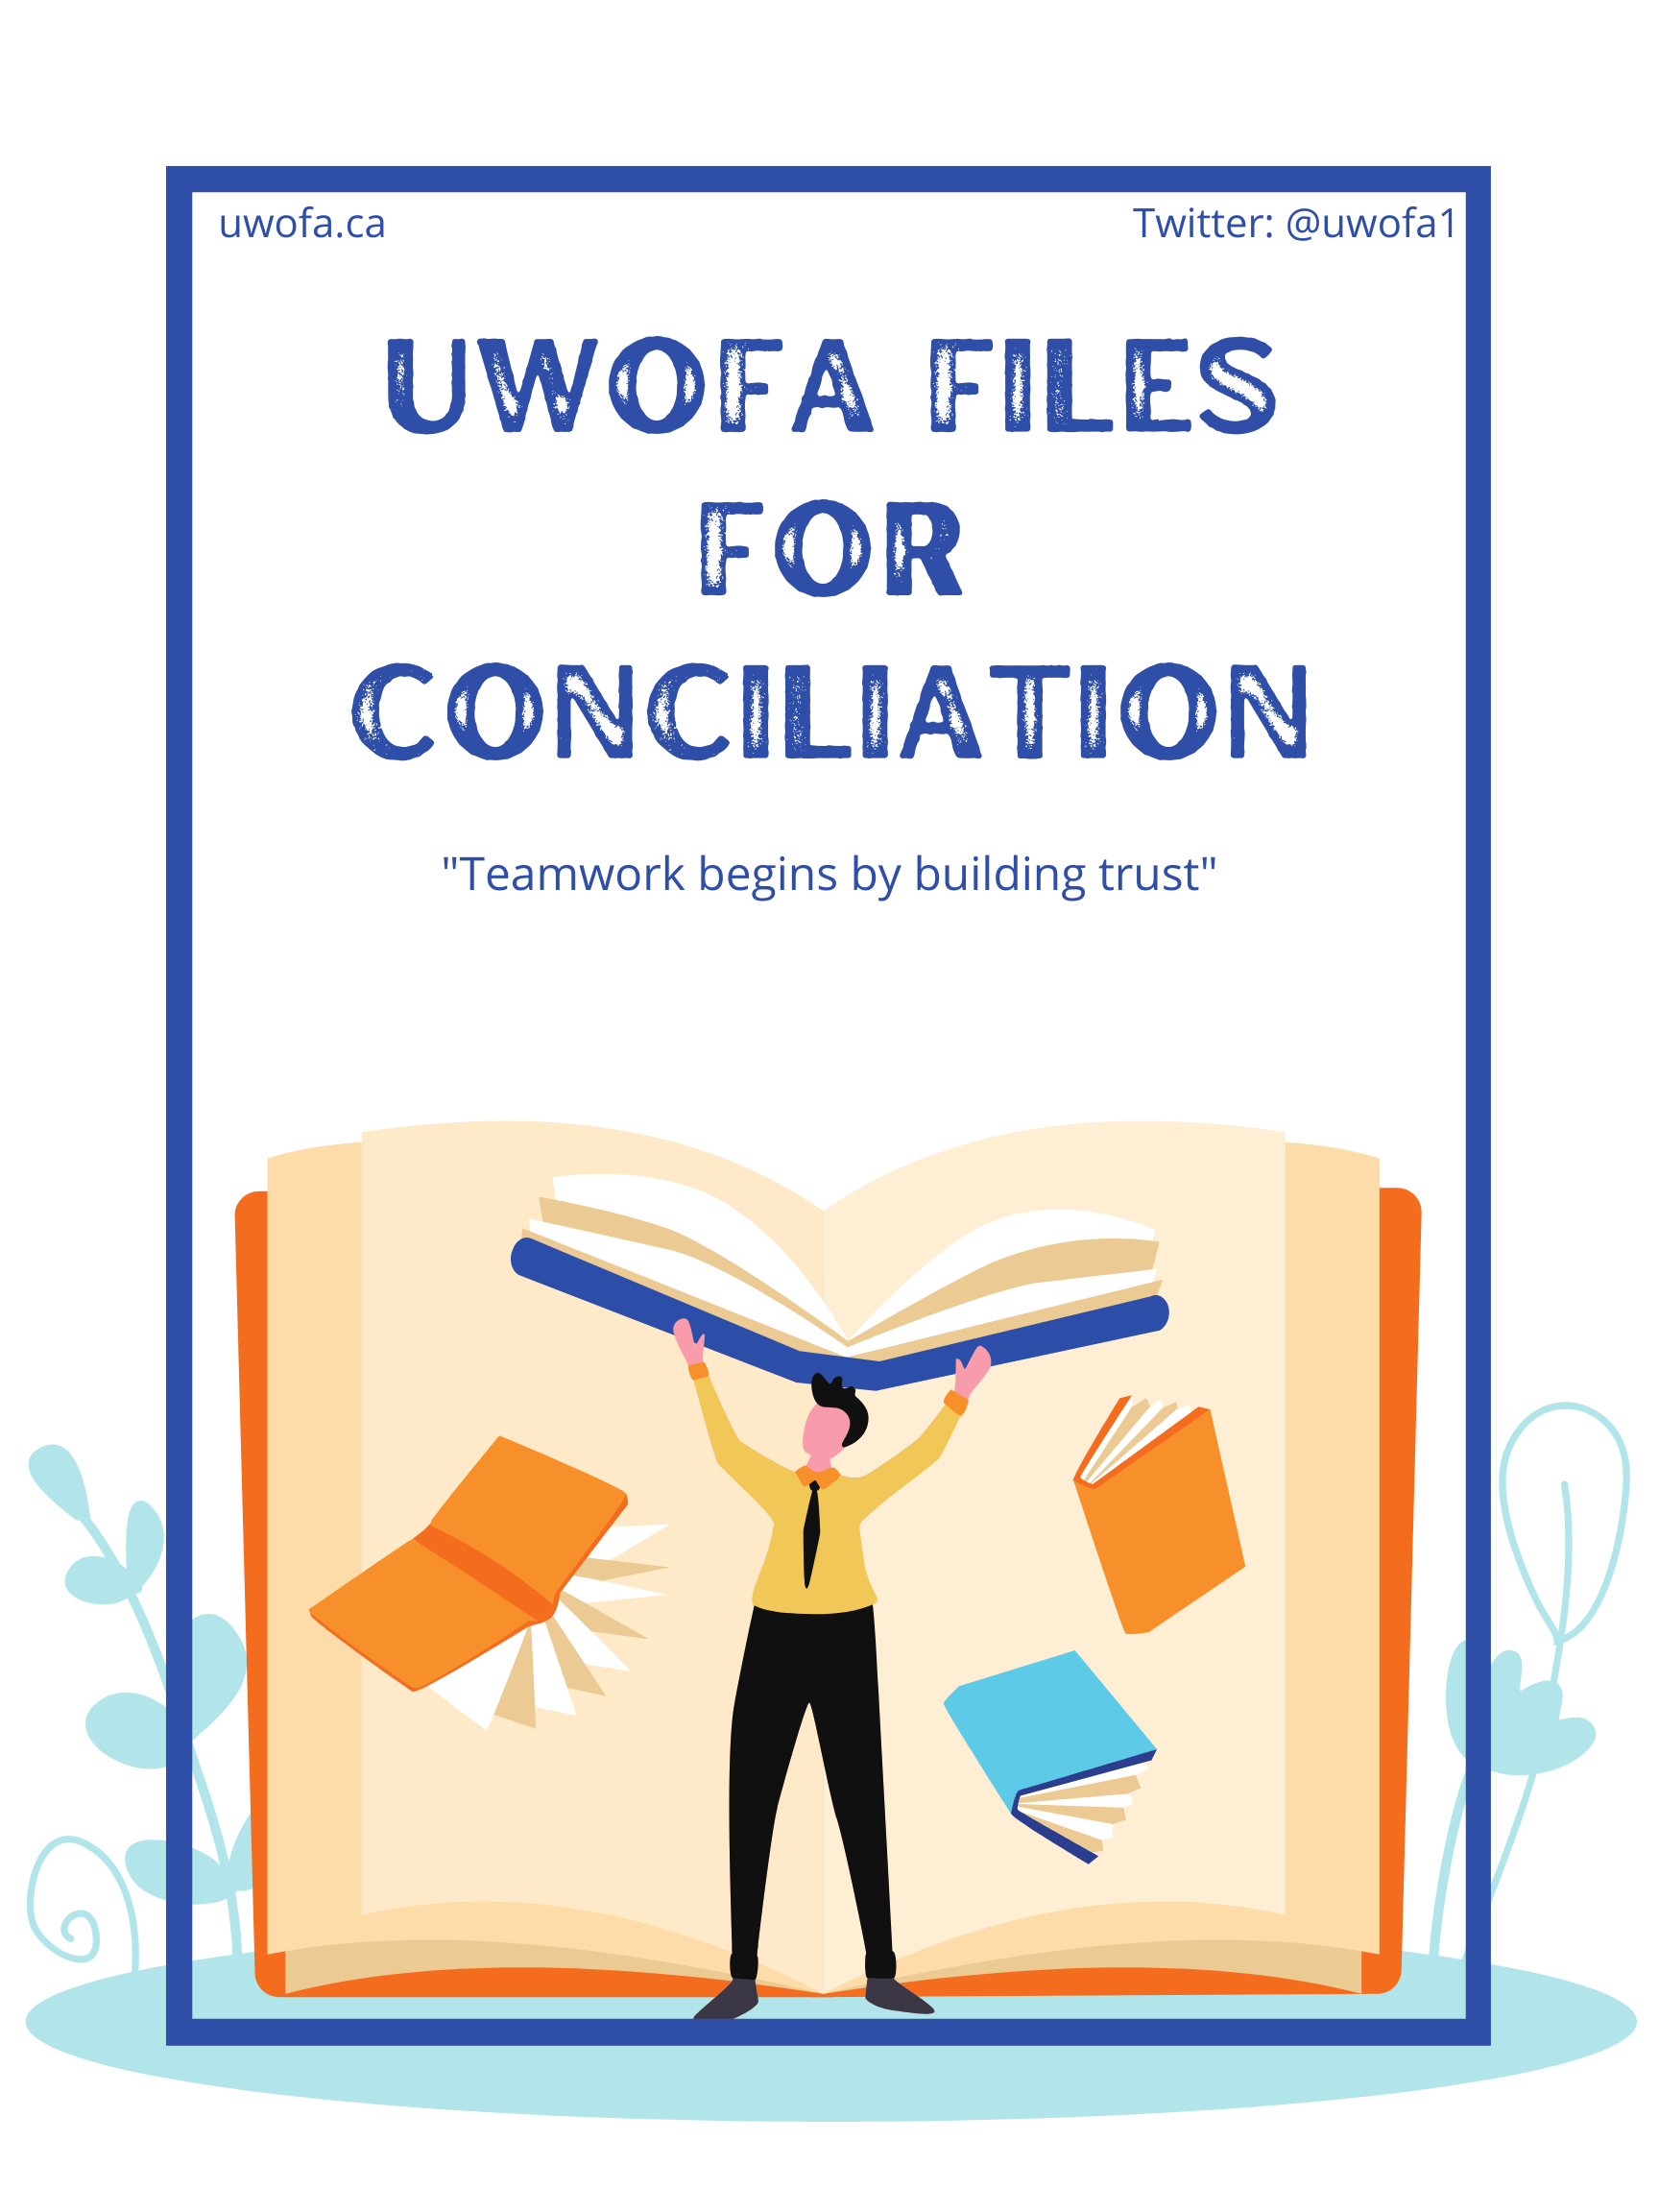 TEXT: UWOFA calls for conciliation, teamwork begins by building trust, uwofa.ca, Twitter: @uwofa1, IMAGE: animated man carrying books over shoulders